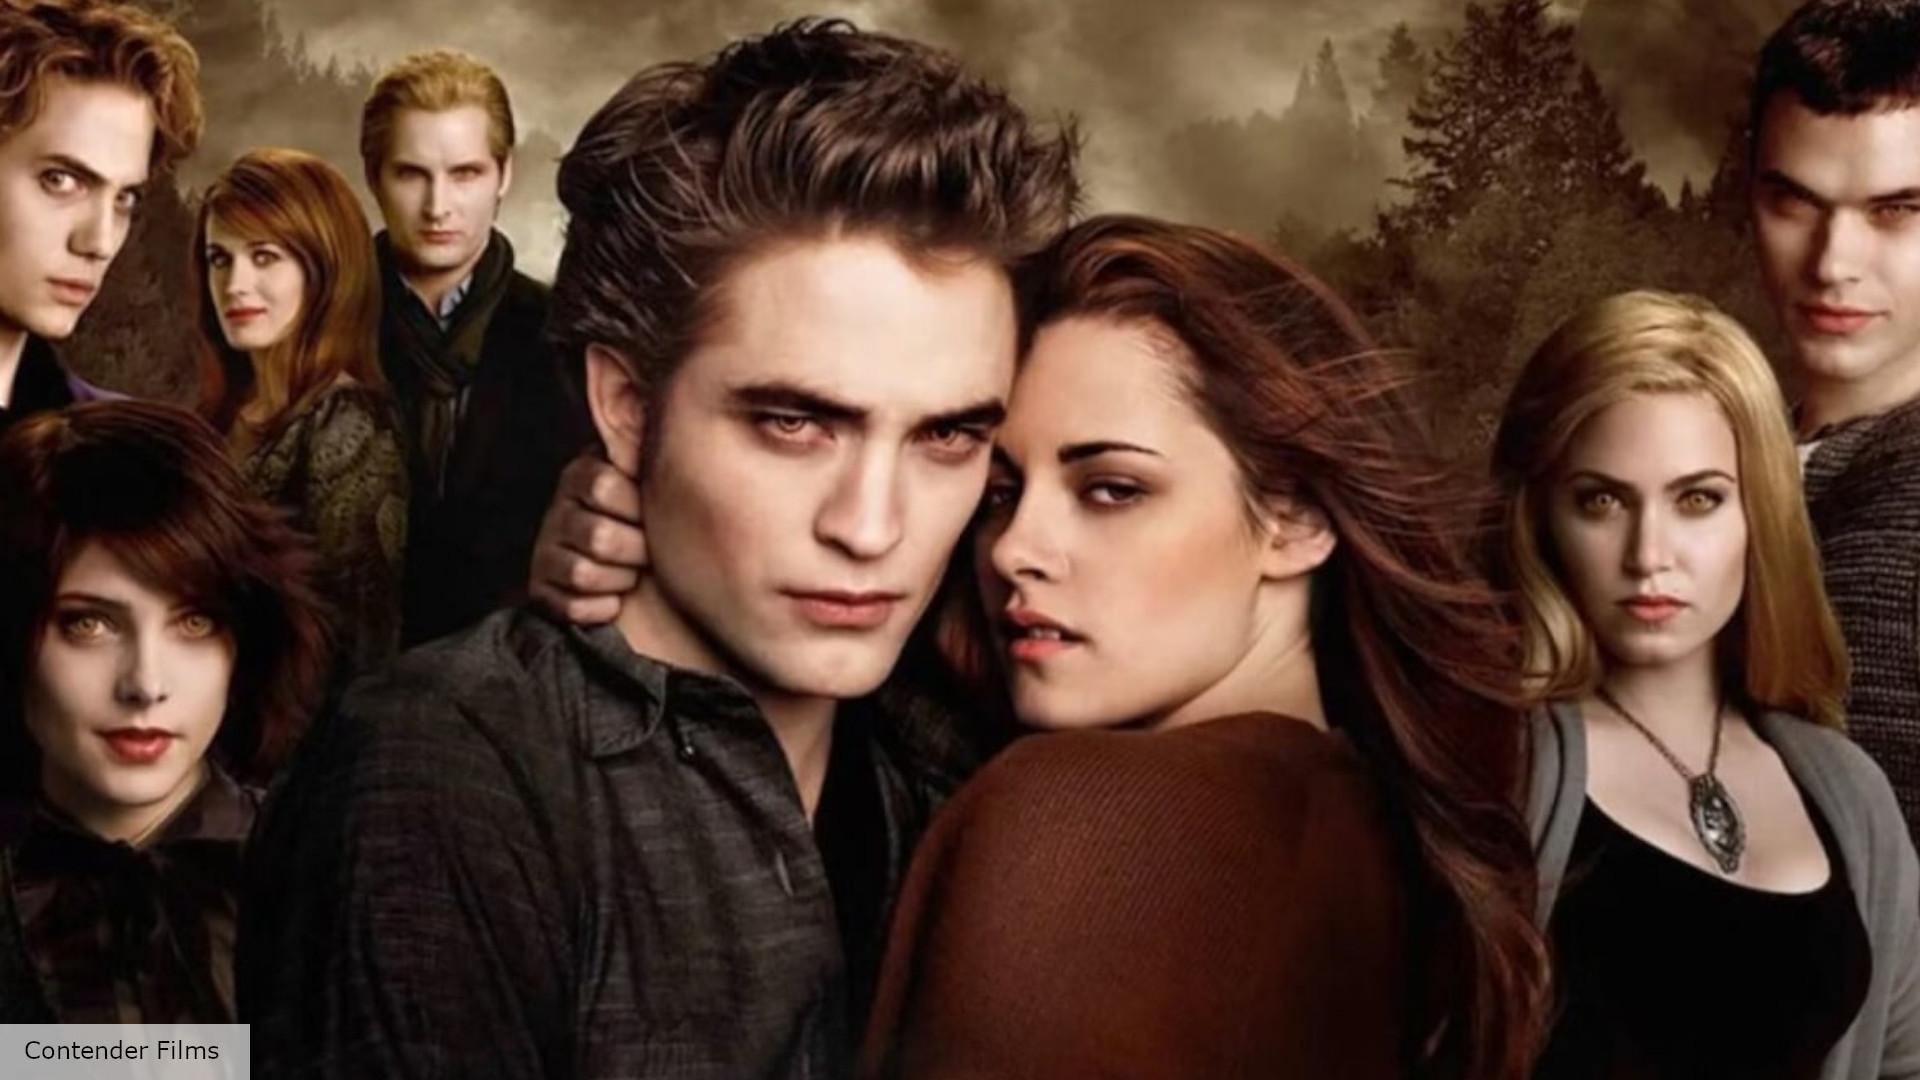 Twilight cast and characters – meet the stars of the vampire movies